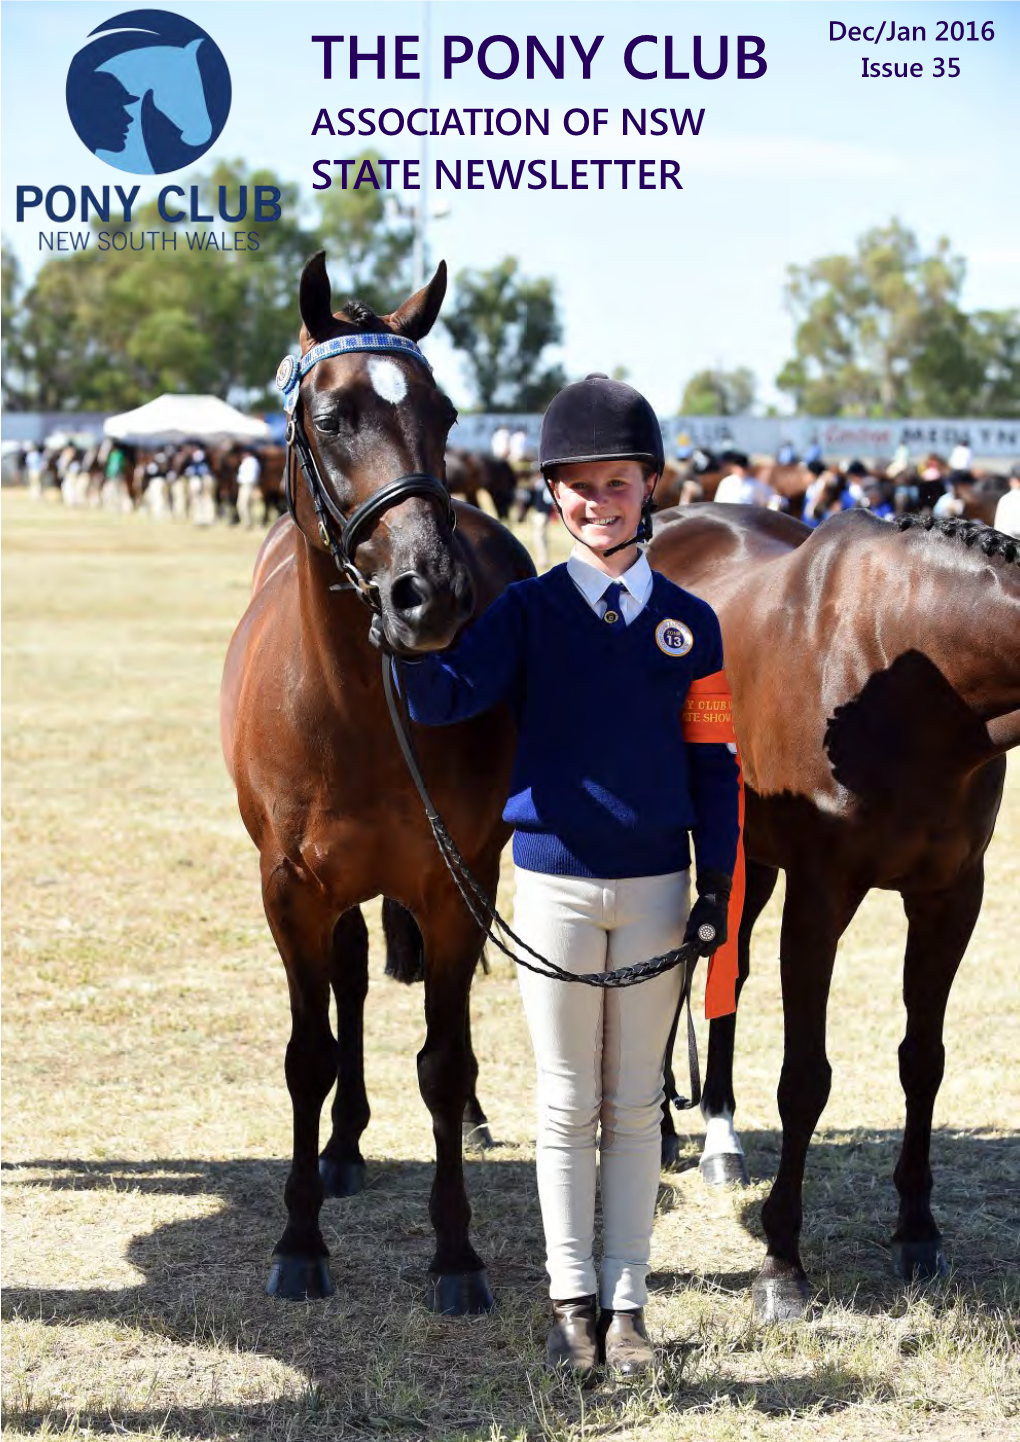 THE PONY CLUB Issue 35 ASSOCIATION of NSW STATE NEWSLETTER